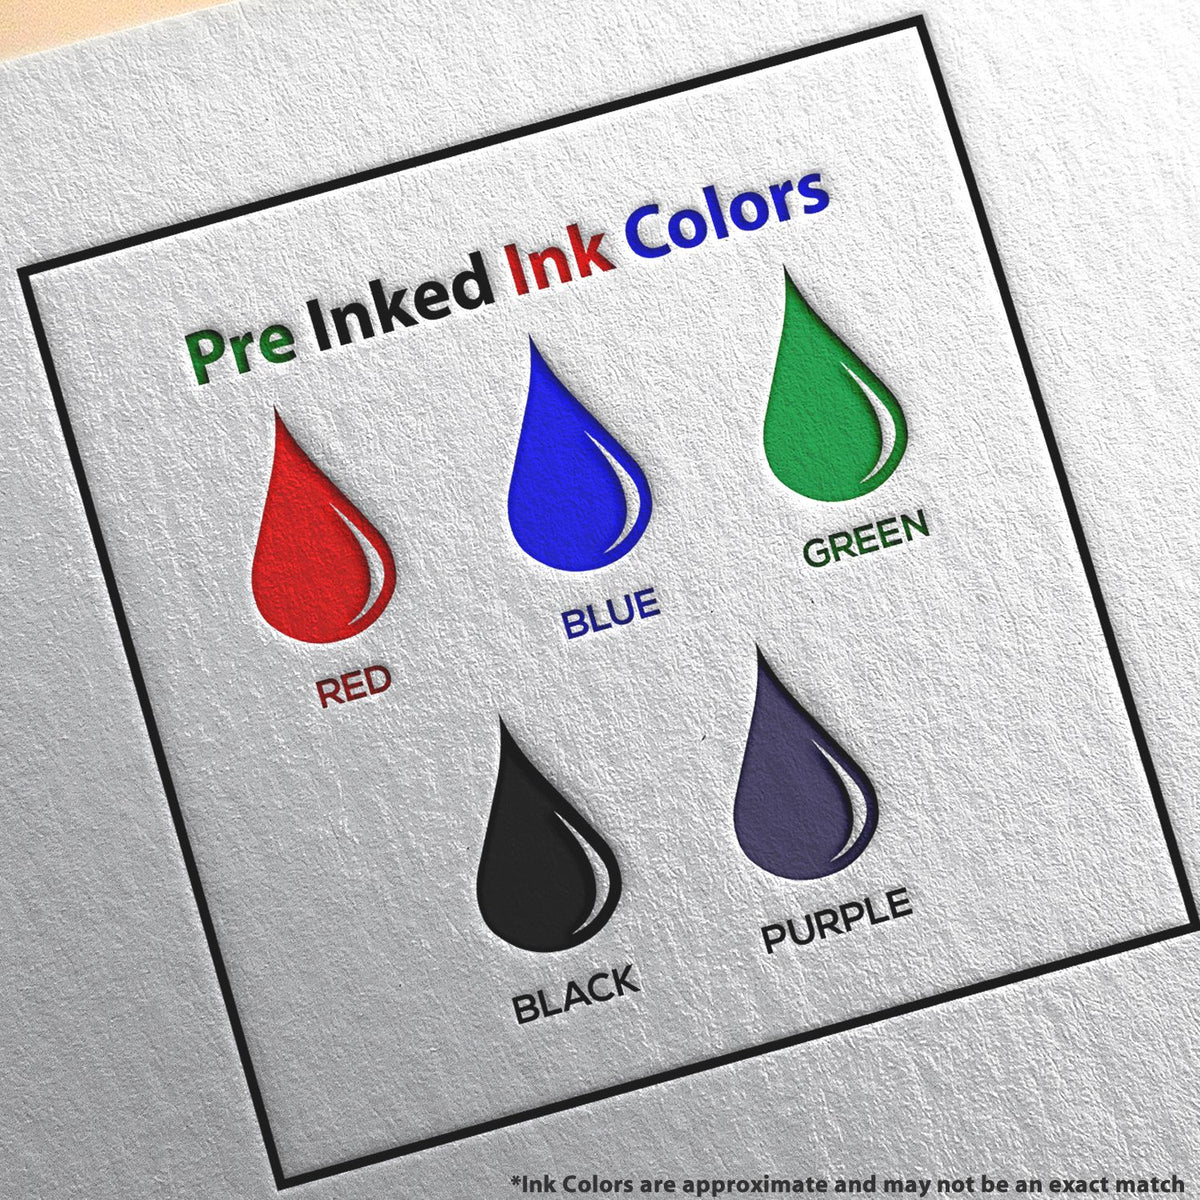 A picture showing the different ink colors or hues available for the Premium MaxLight Pre-Inked Virginia Landscape Architectural Stamp product.